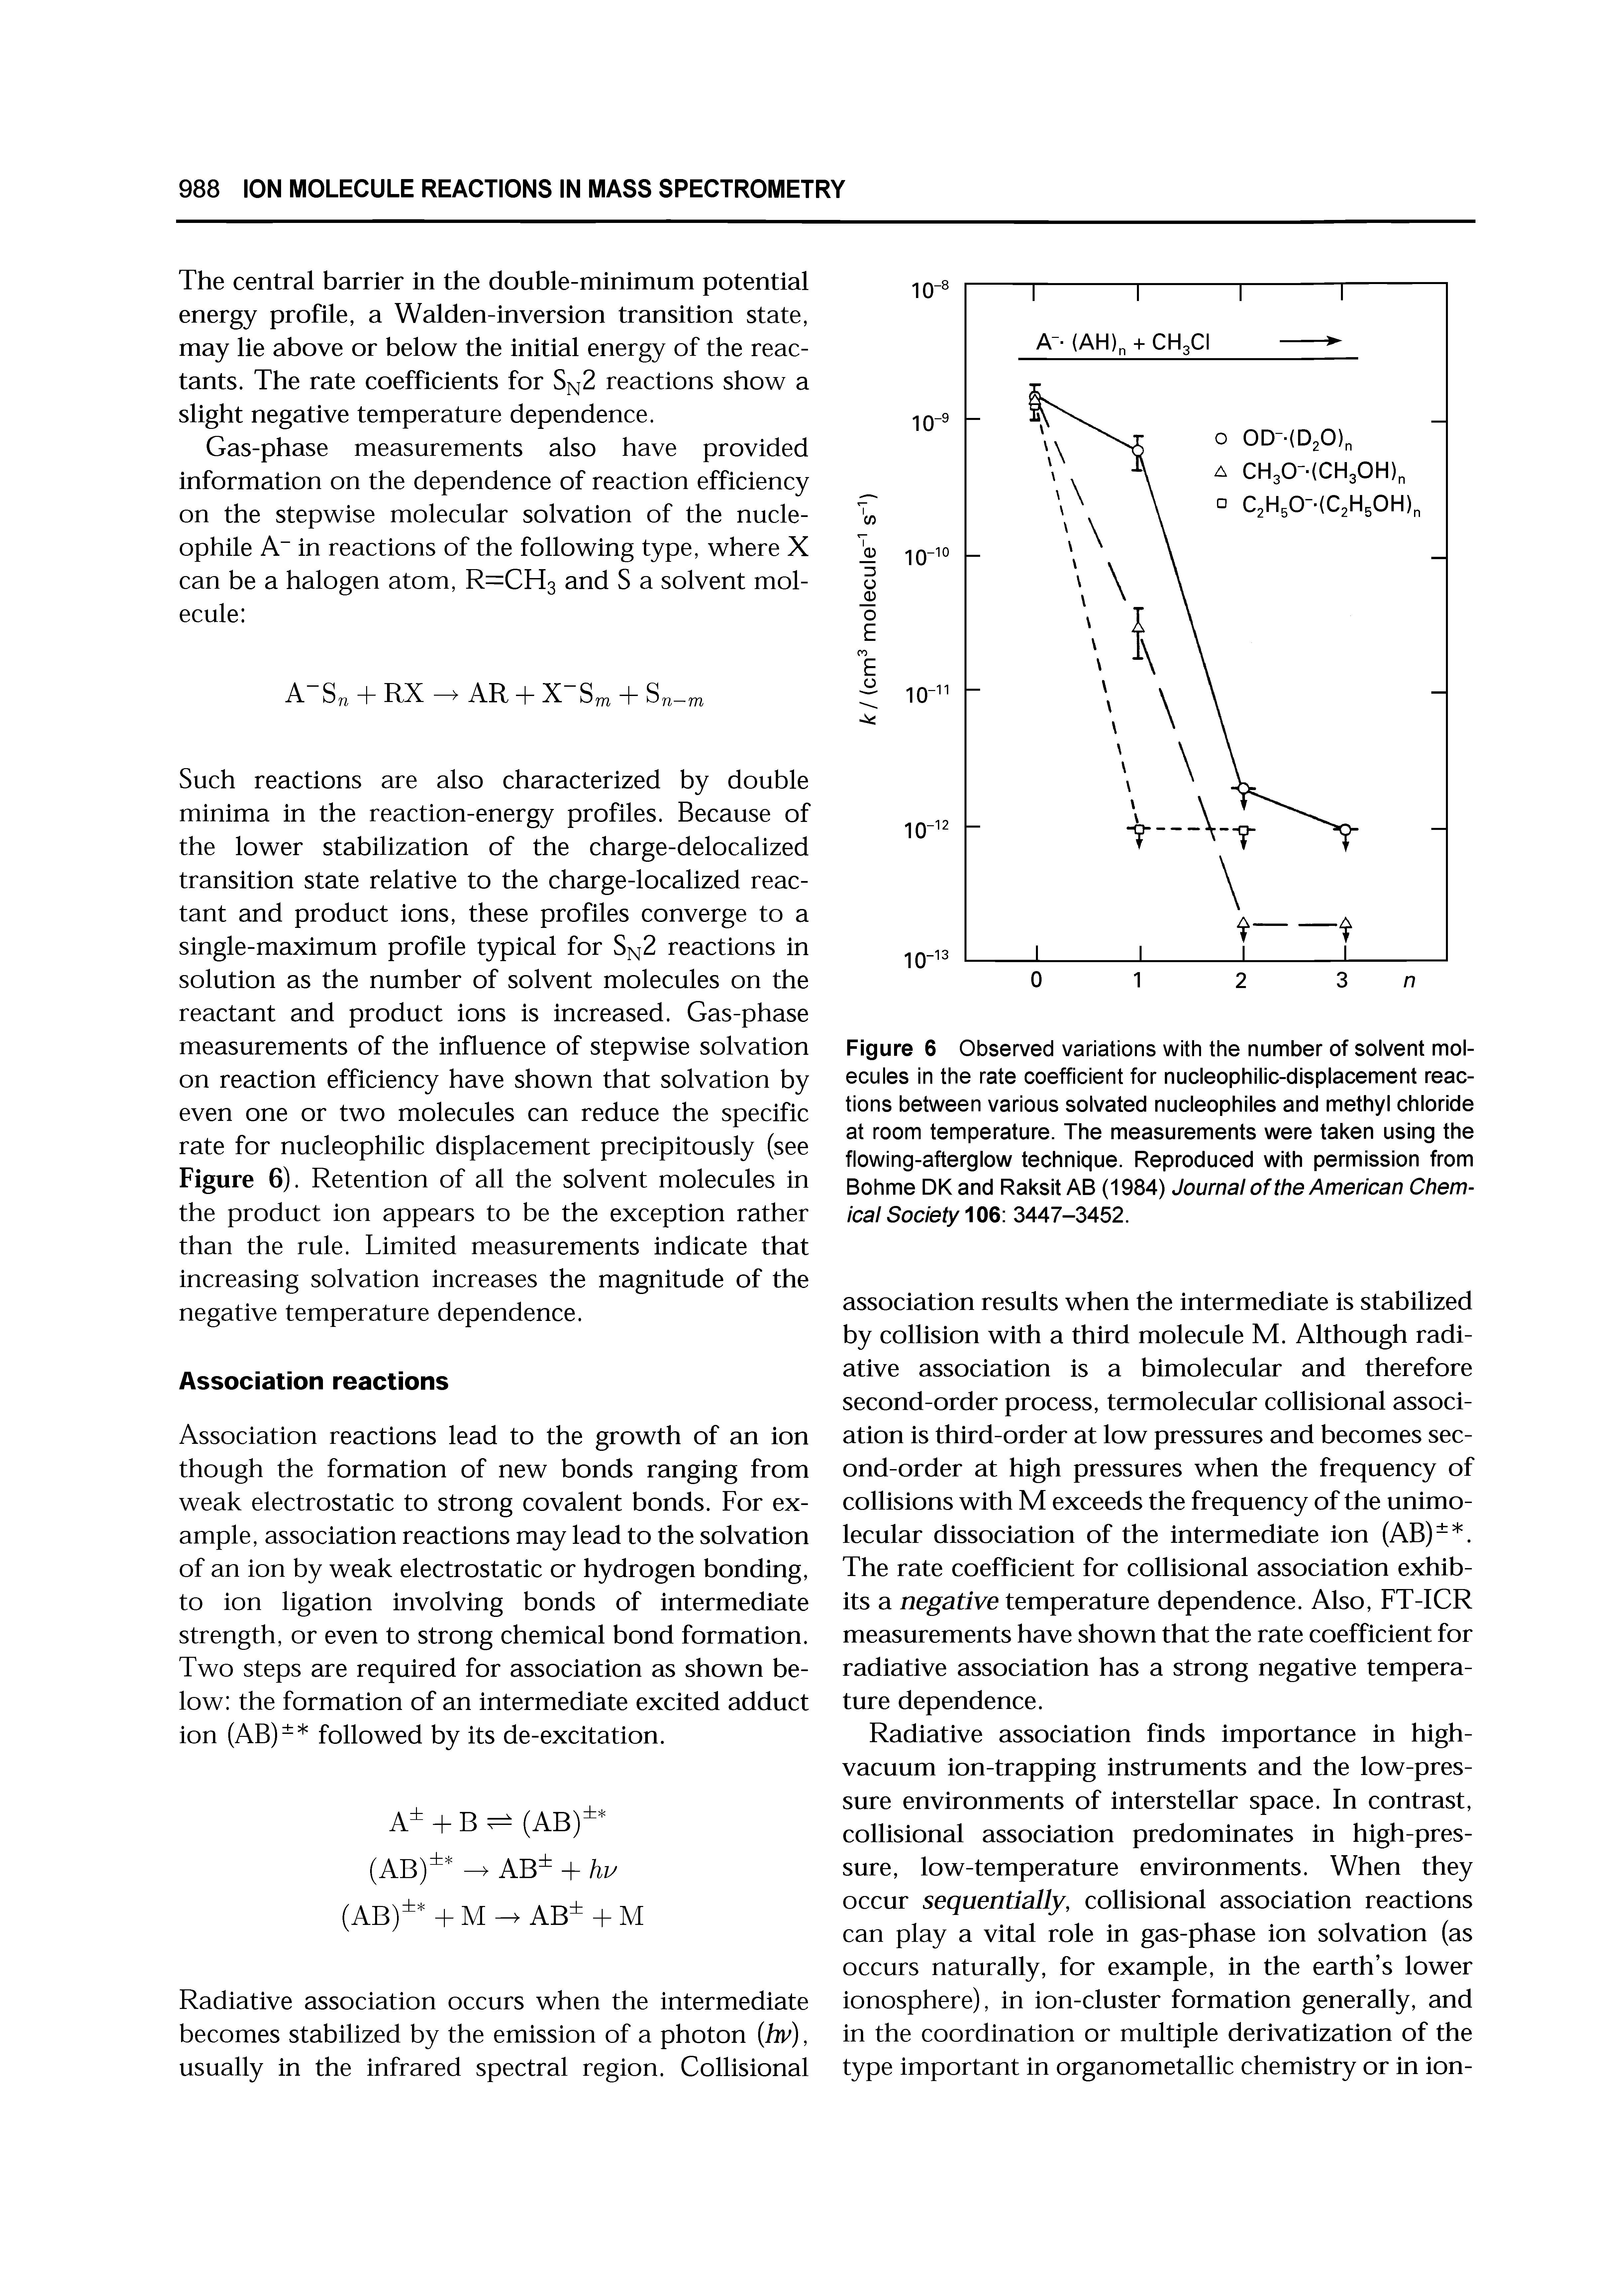 Figure 6 Observed variations with the number of solvent molecules in the rate coefficient for nucleophilic-displacement reactions between various solvated nucleophiles and methyl chloride at room temperature. The measurements were taken using the flowing-afterglow technique. Reproduced with permission from Bohme DK and Raksit AB (1984) Journal of the American Chemical Society 06 3447-3452.